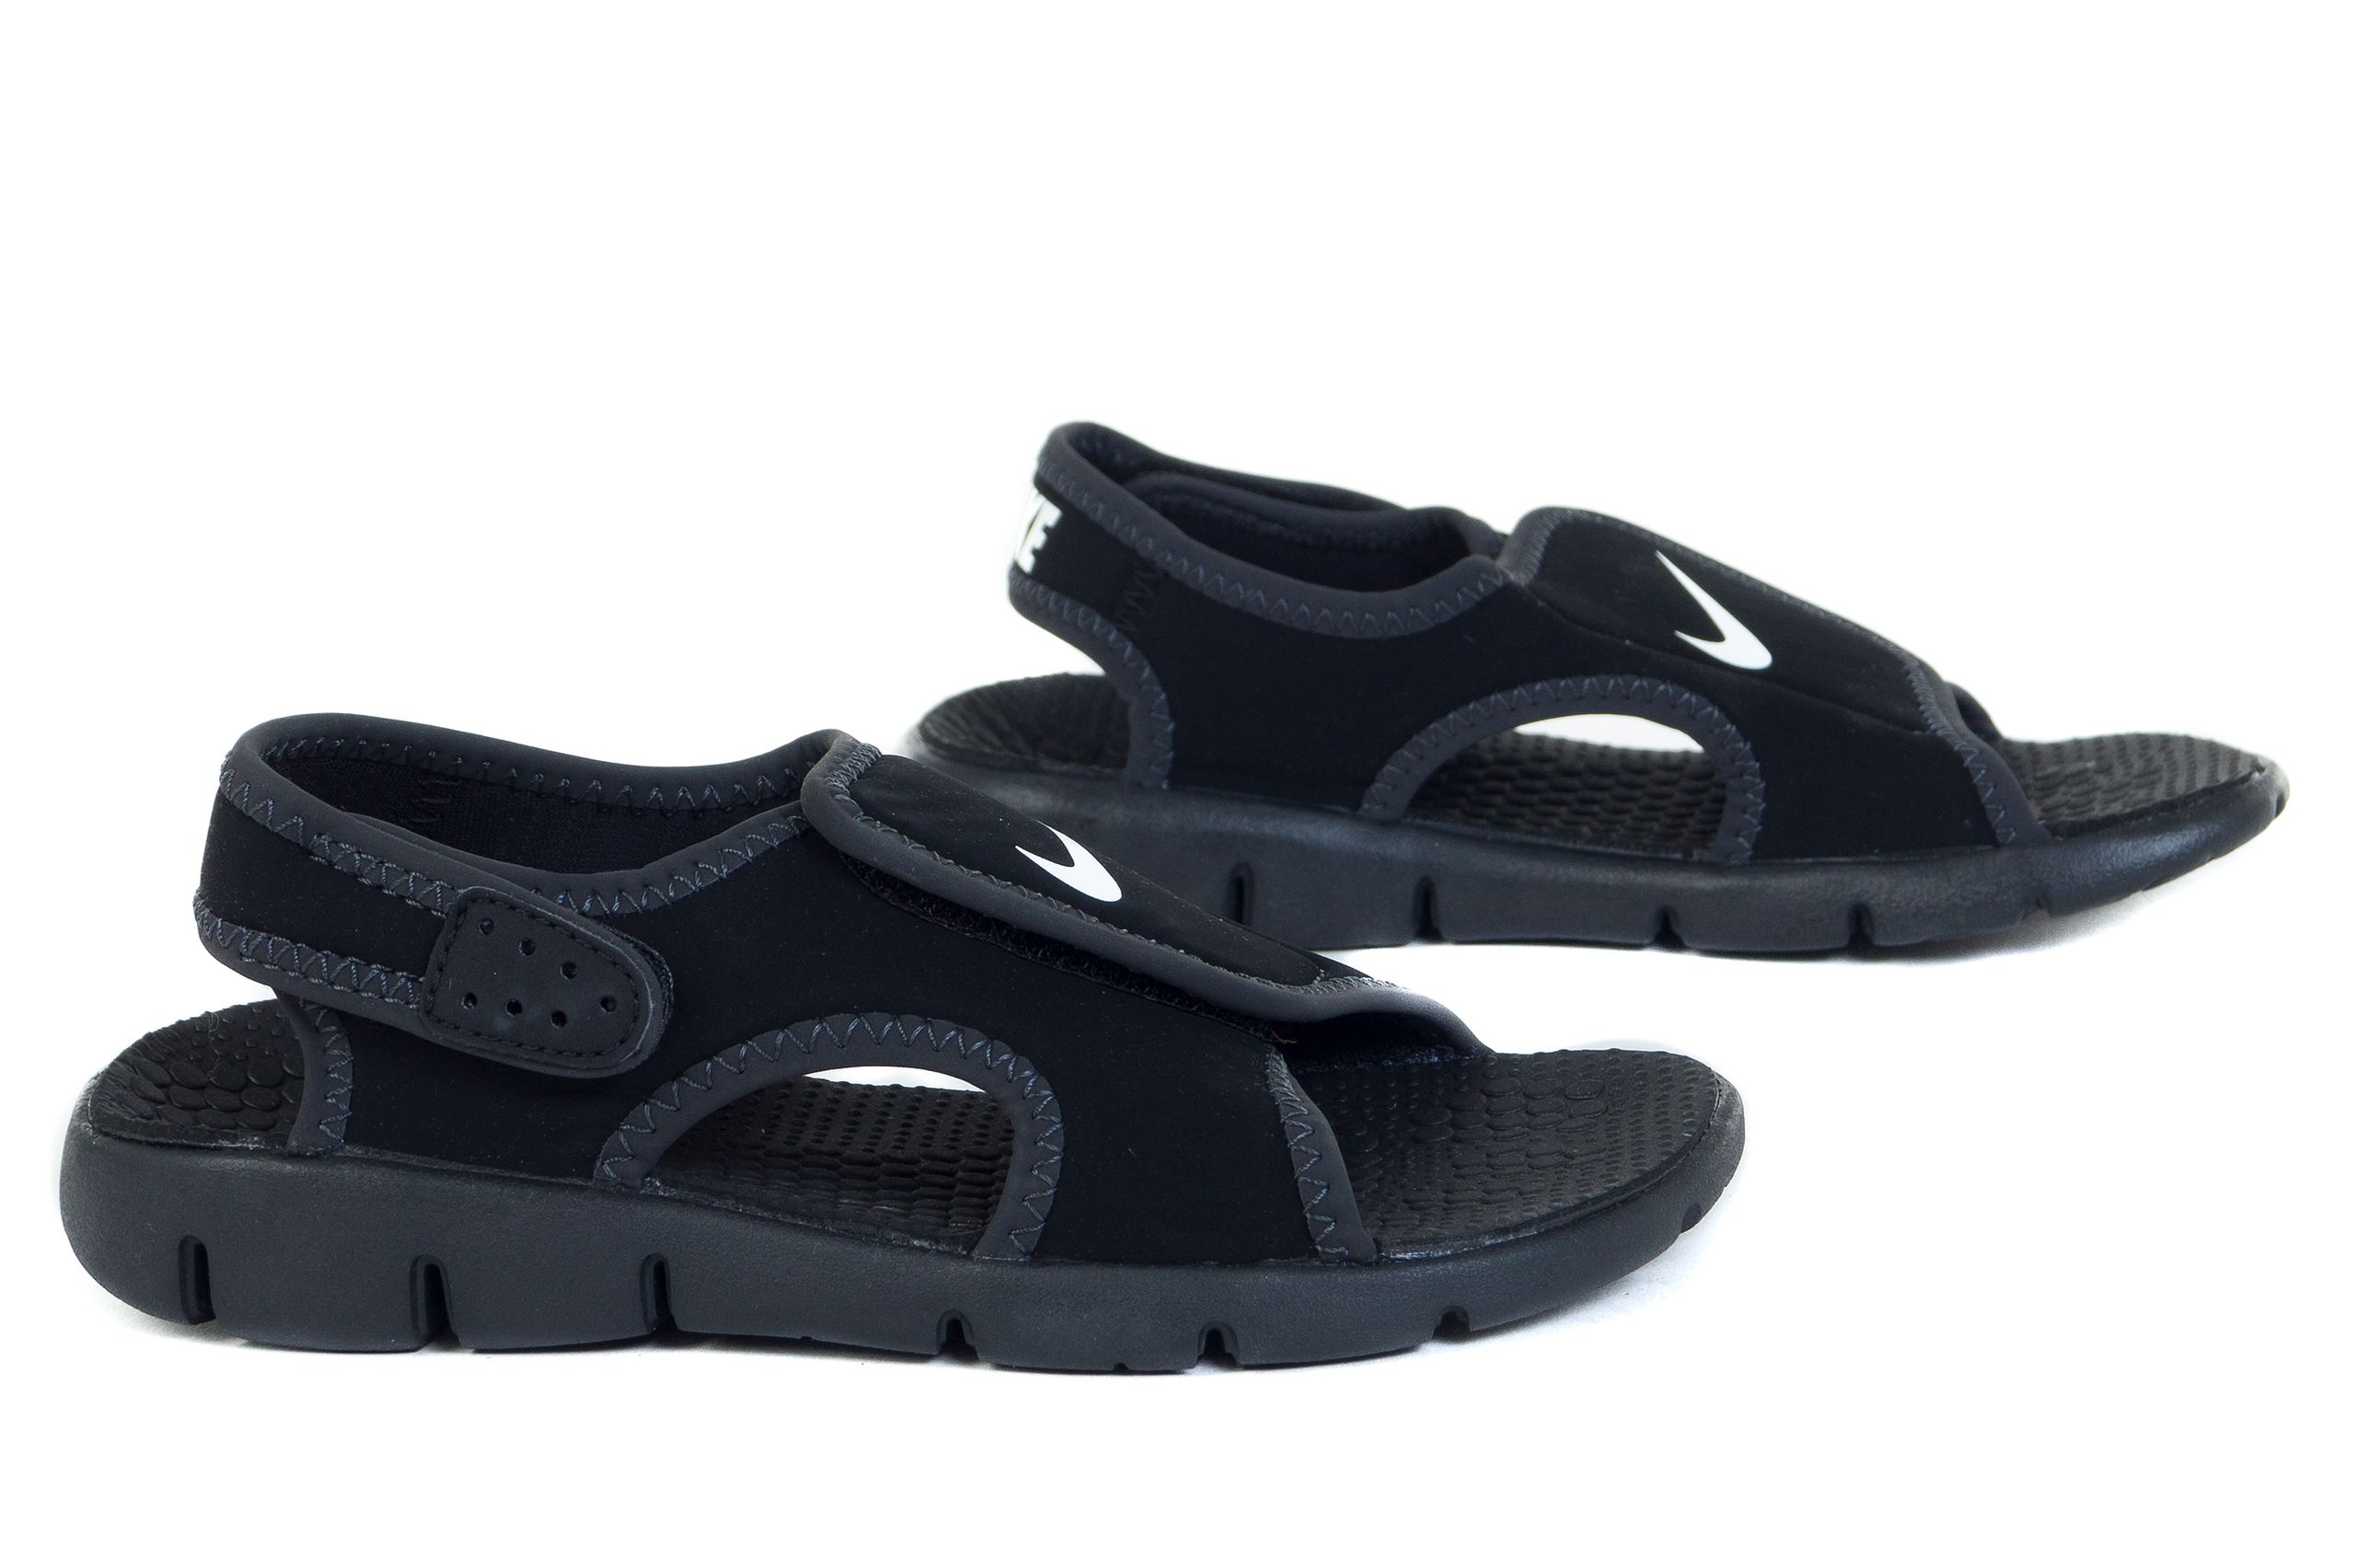 Are These The Best Nike Sunray Sandals For Adults. : 9 Game-Changing Reasons to Buy Nike Sunray Sandals Now